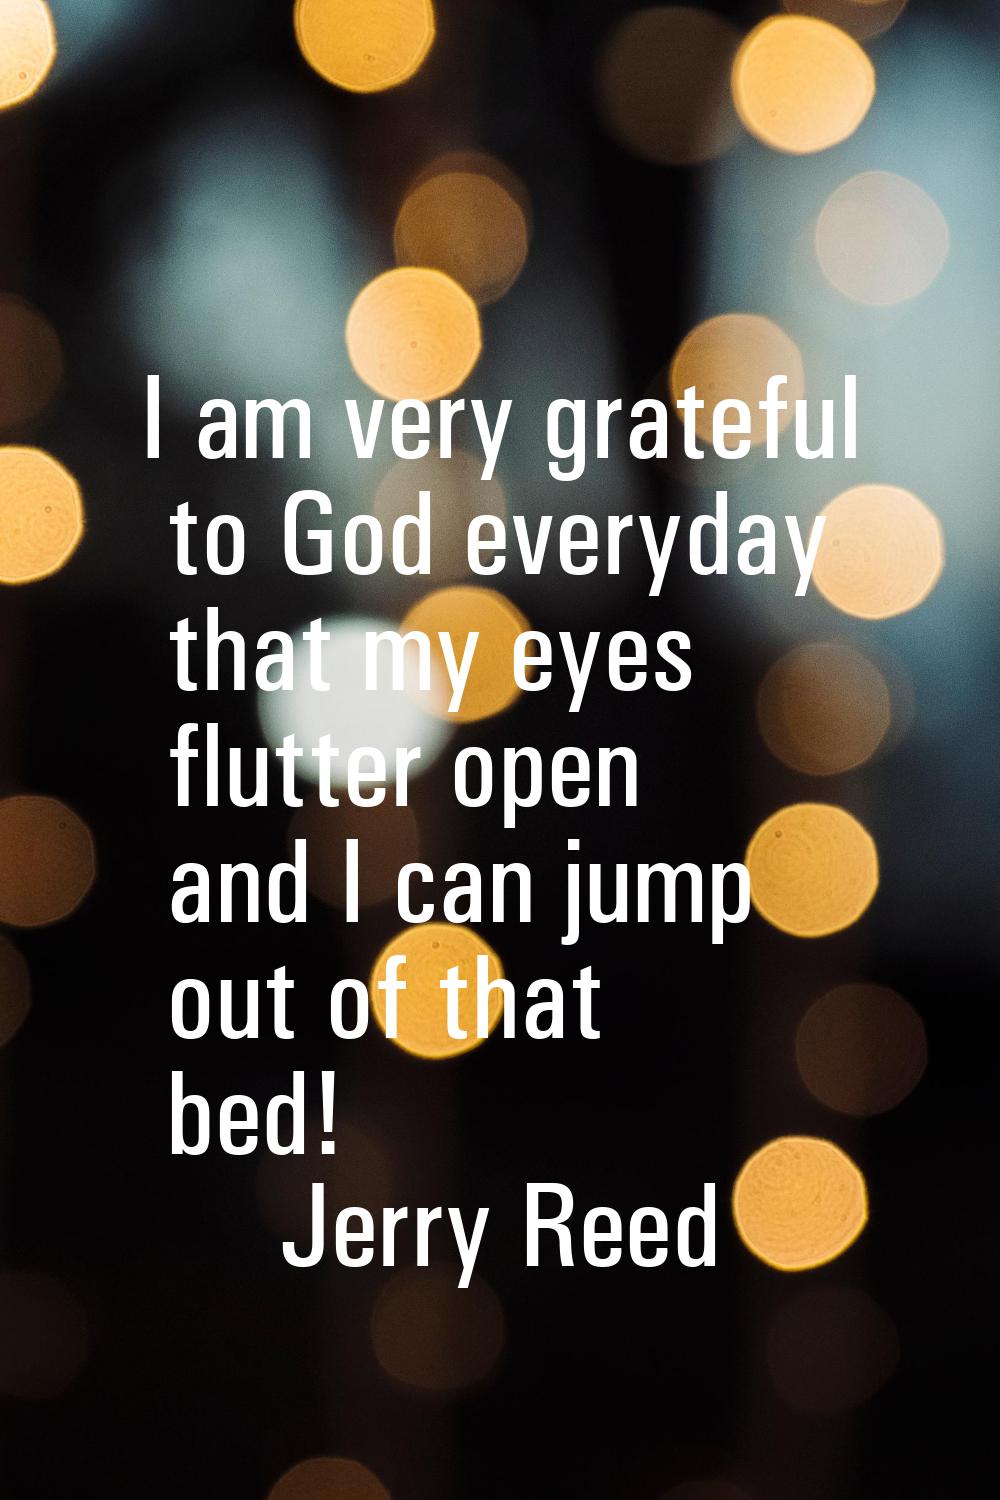 I am very grateful to God everyday that my eyes flutter open and I can jump out of that bed!